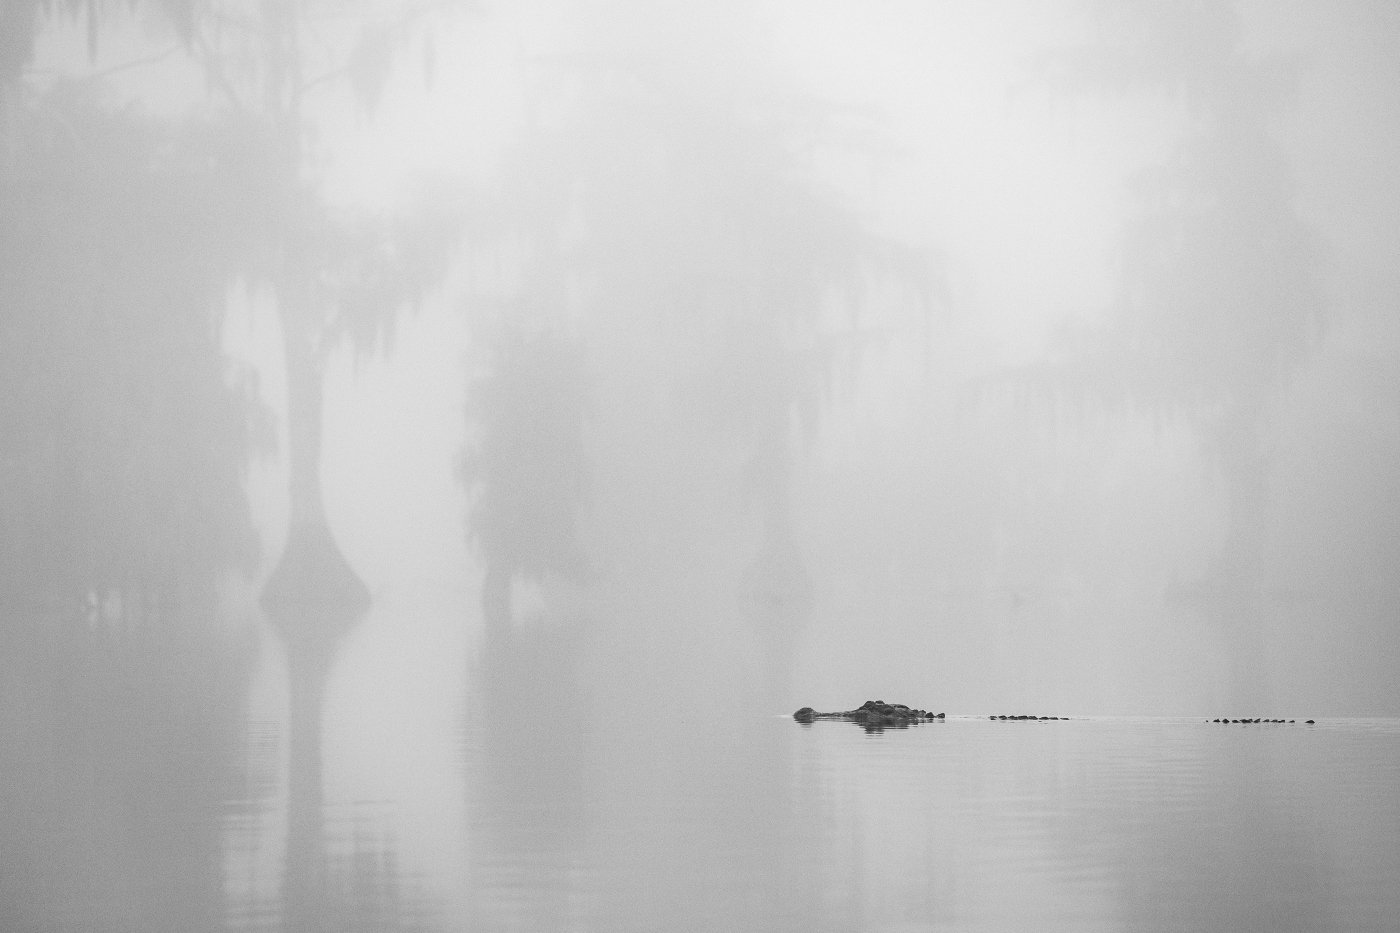 Monster in the Mist, Ben Pierce,Lafayette Photographic Society,	3rd Place